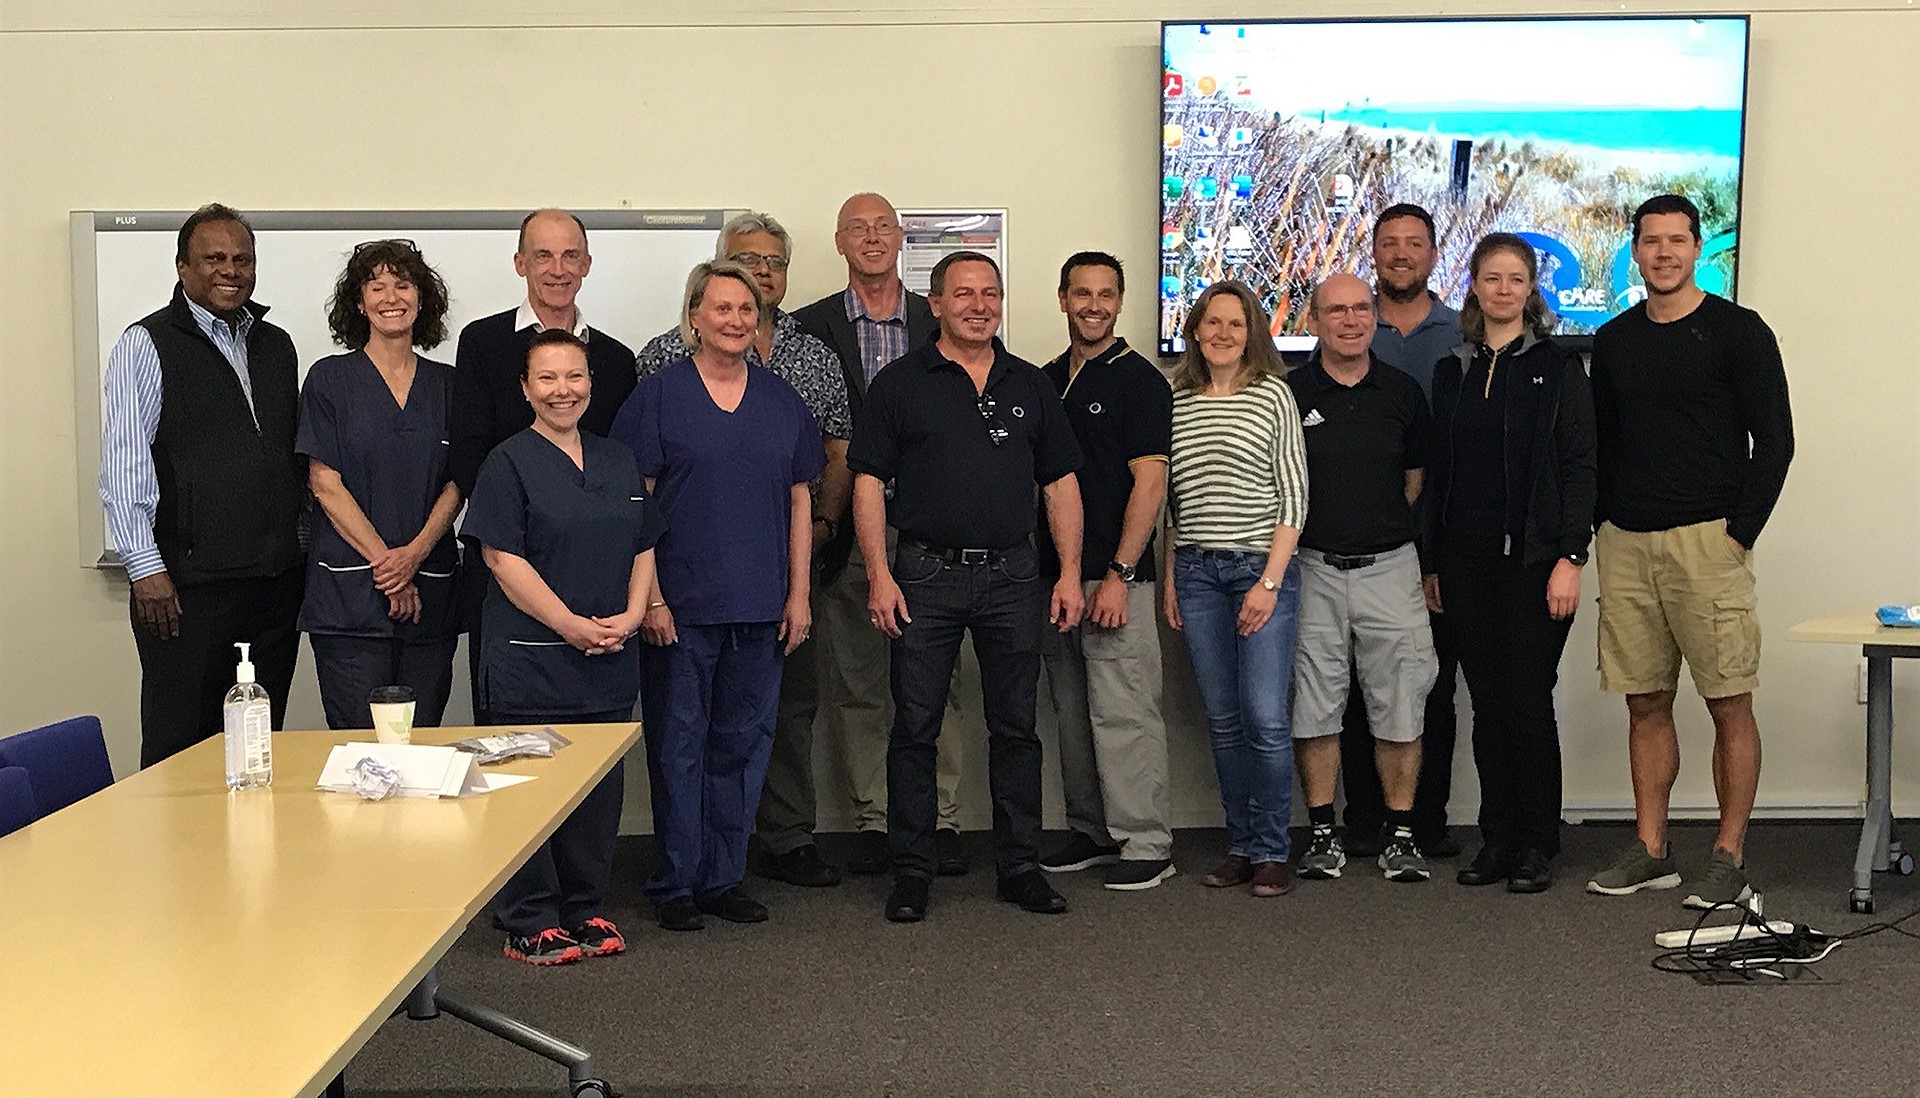 Hosting the internationally recognised EMST course at Tauranga Hospital for the first time was seen as great news for the BOPDHB and the community it serves.